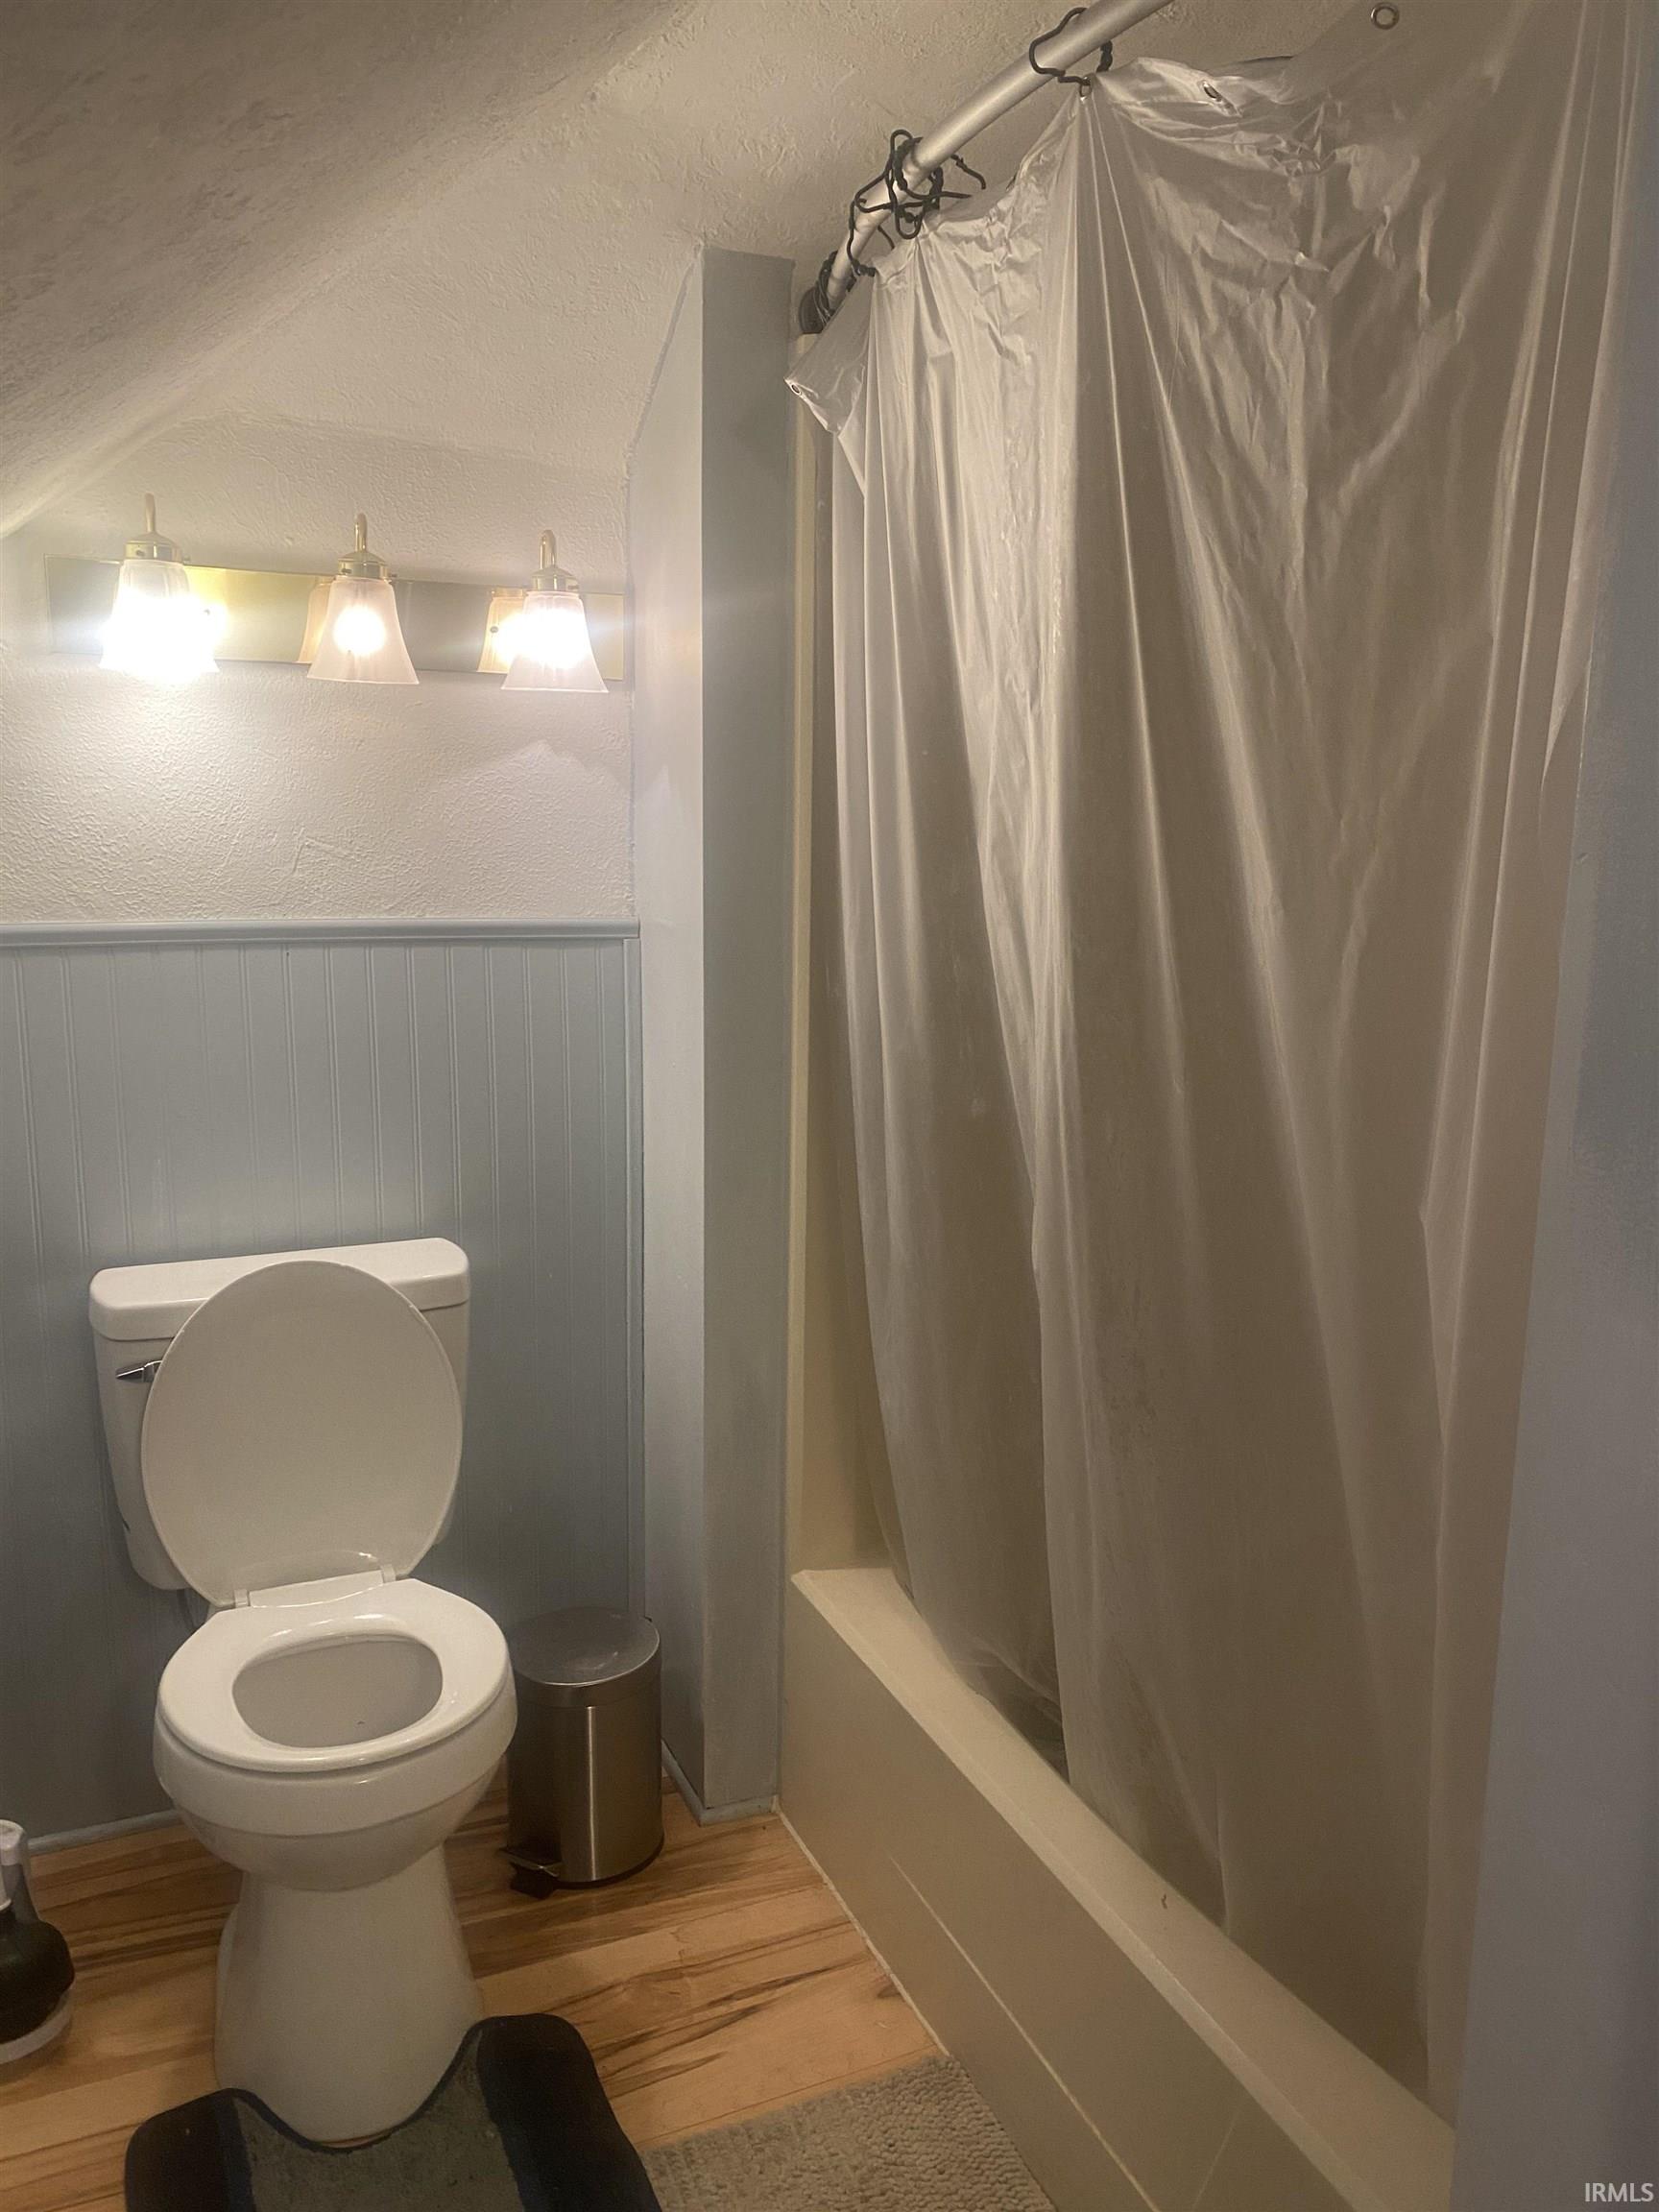 Bathroom of the two bedroom upper level Apartment